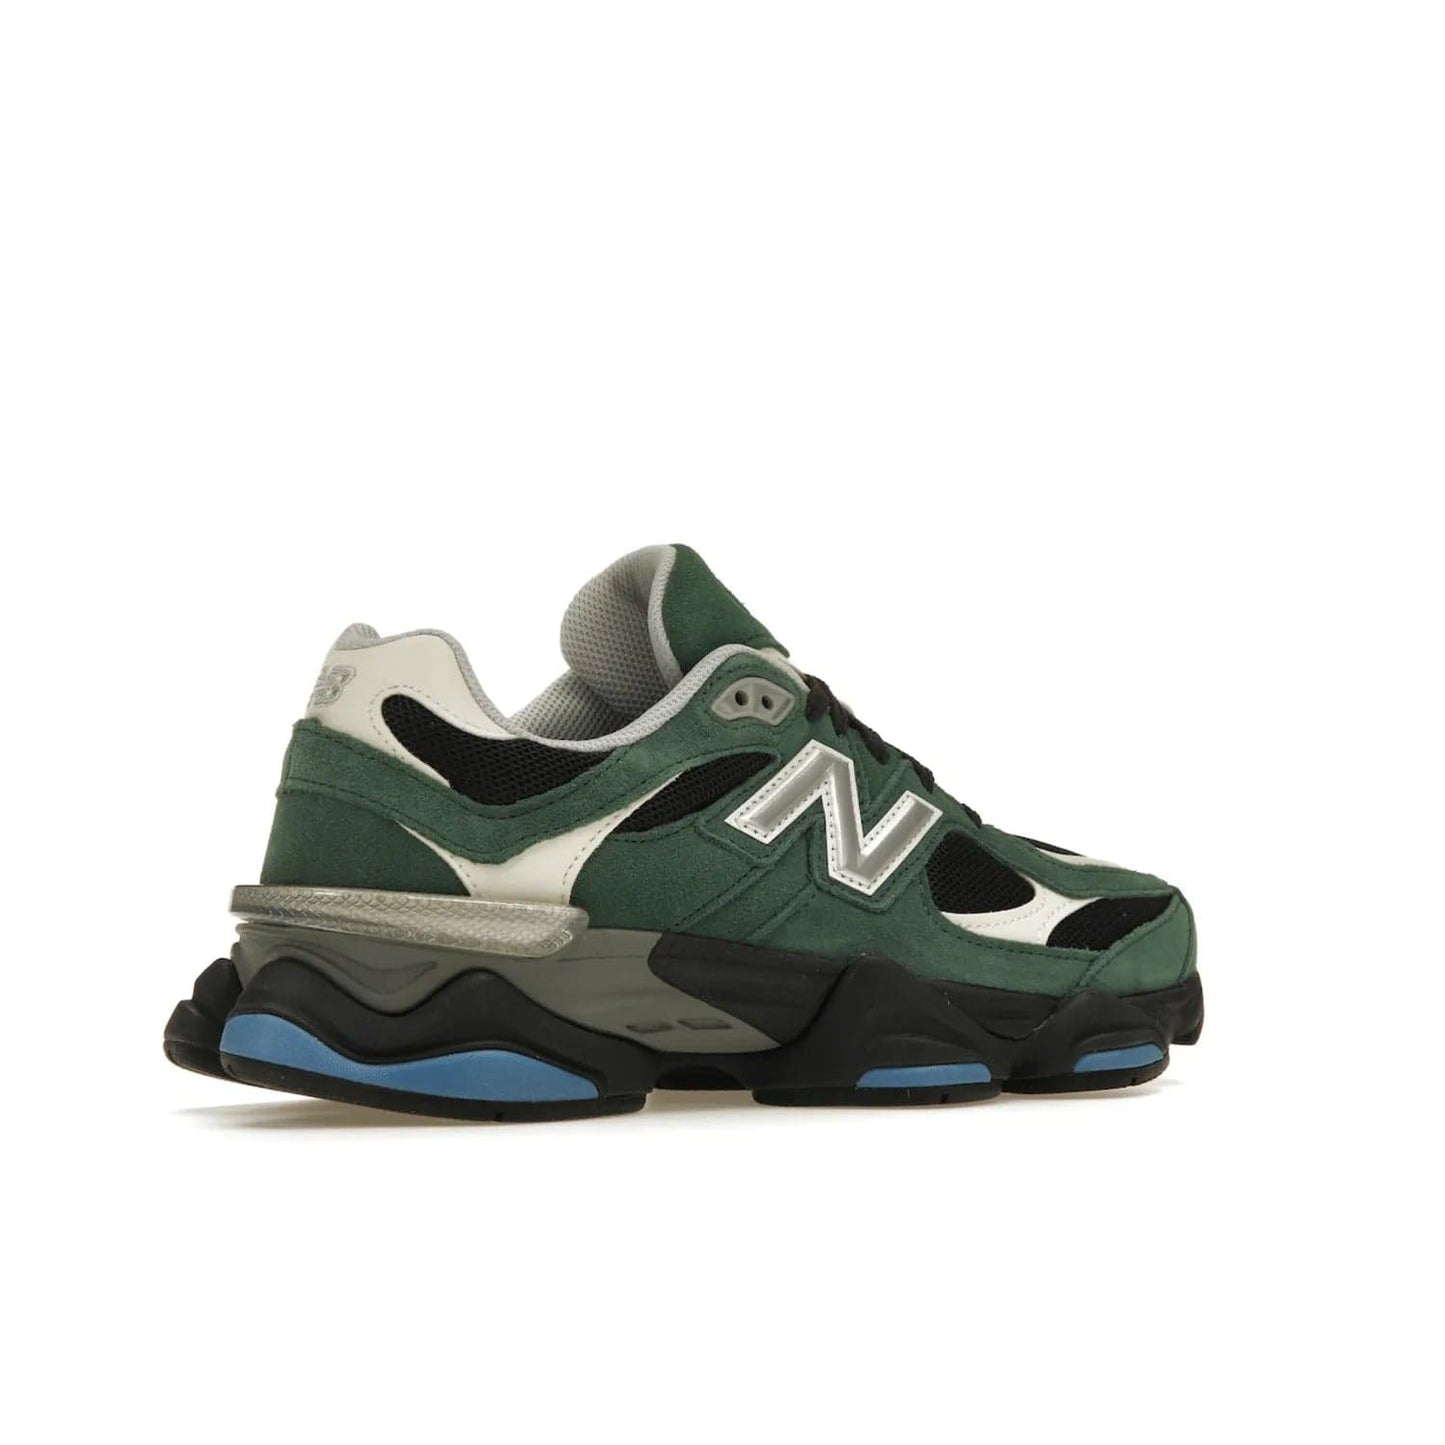 New Balance 9060 Team Forest Green - Image 34 - Only at www.BallersClubKickz.com - Introducing the New Balance 9060 Team Forest Green! Durable statement sneaker with a vibrant forest green upper and contrast detailing. Release date 2023-04-04 - don't miss out!